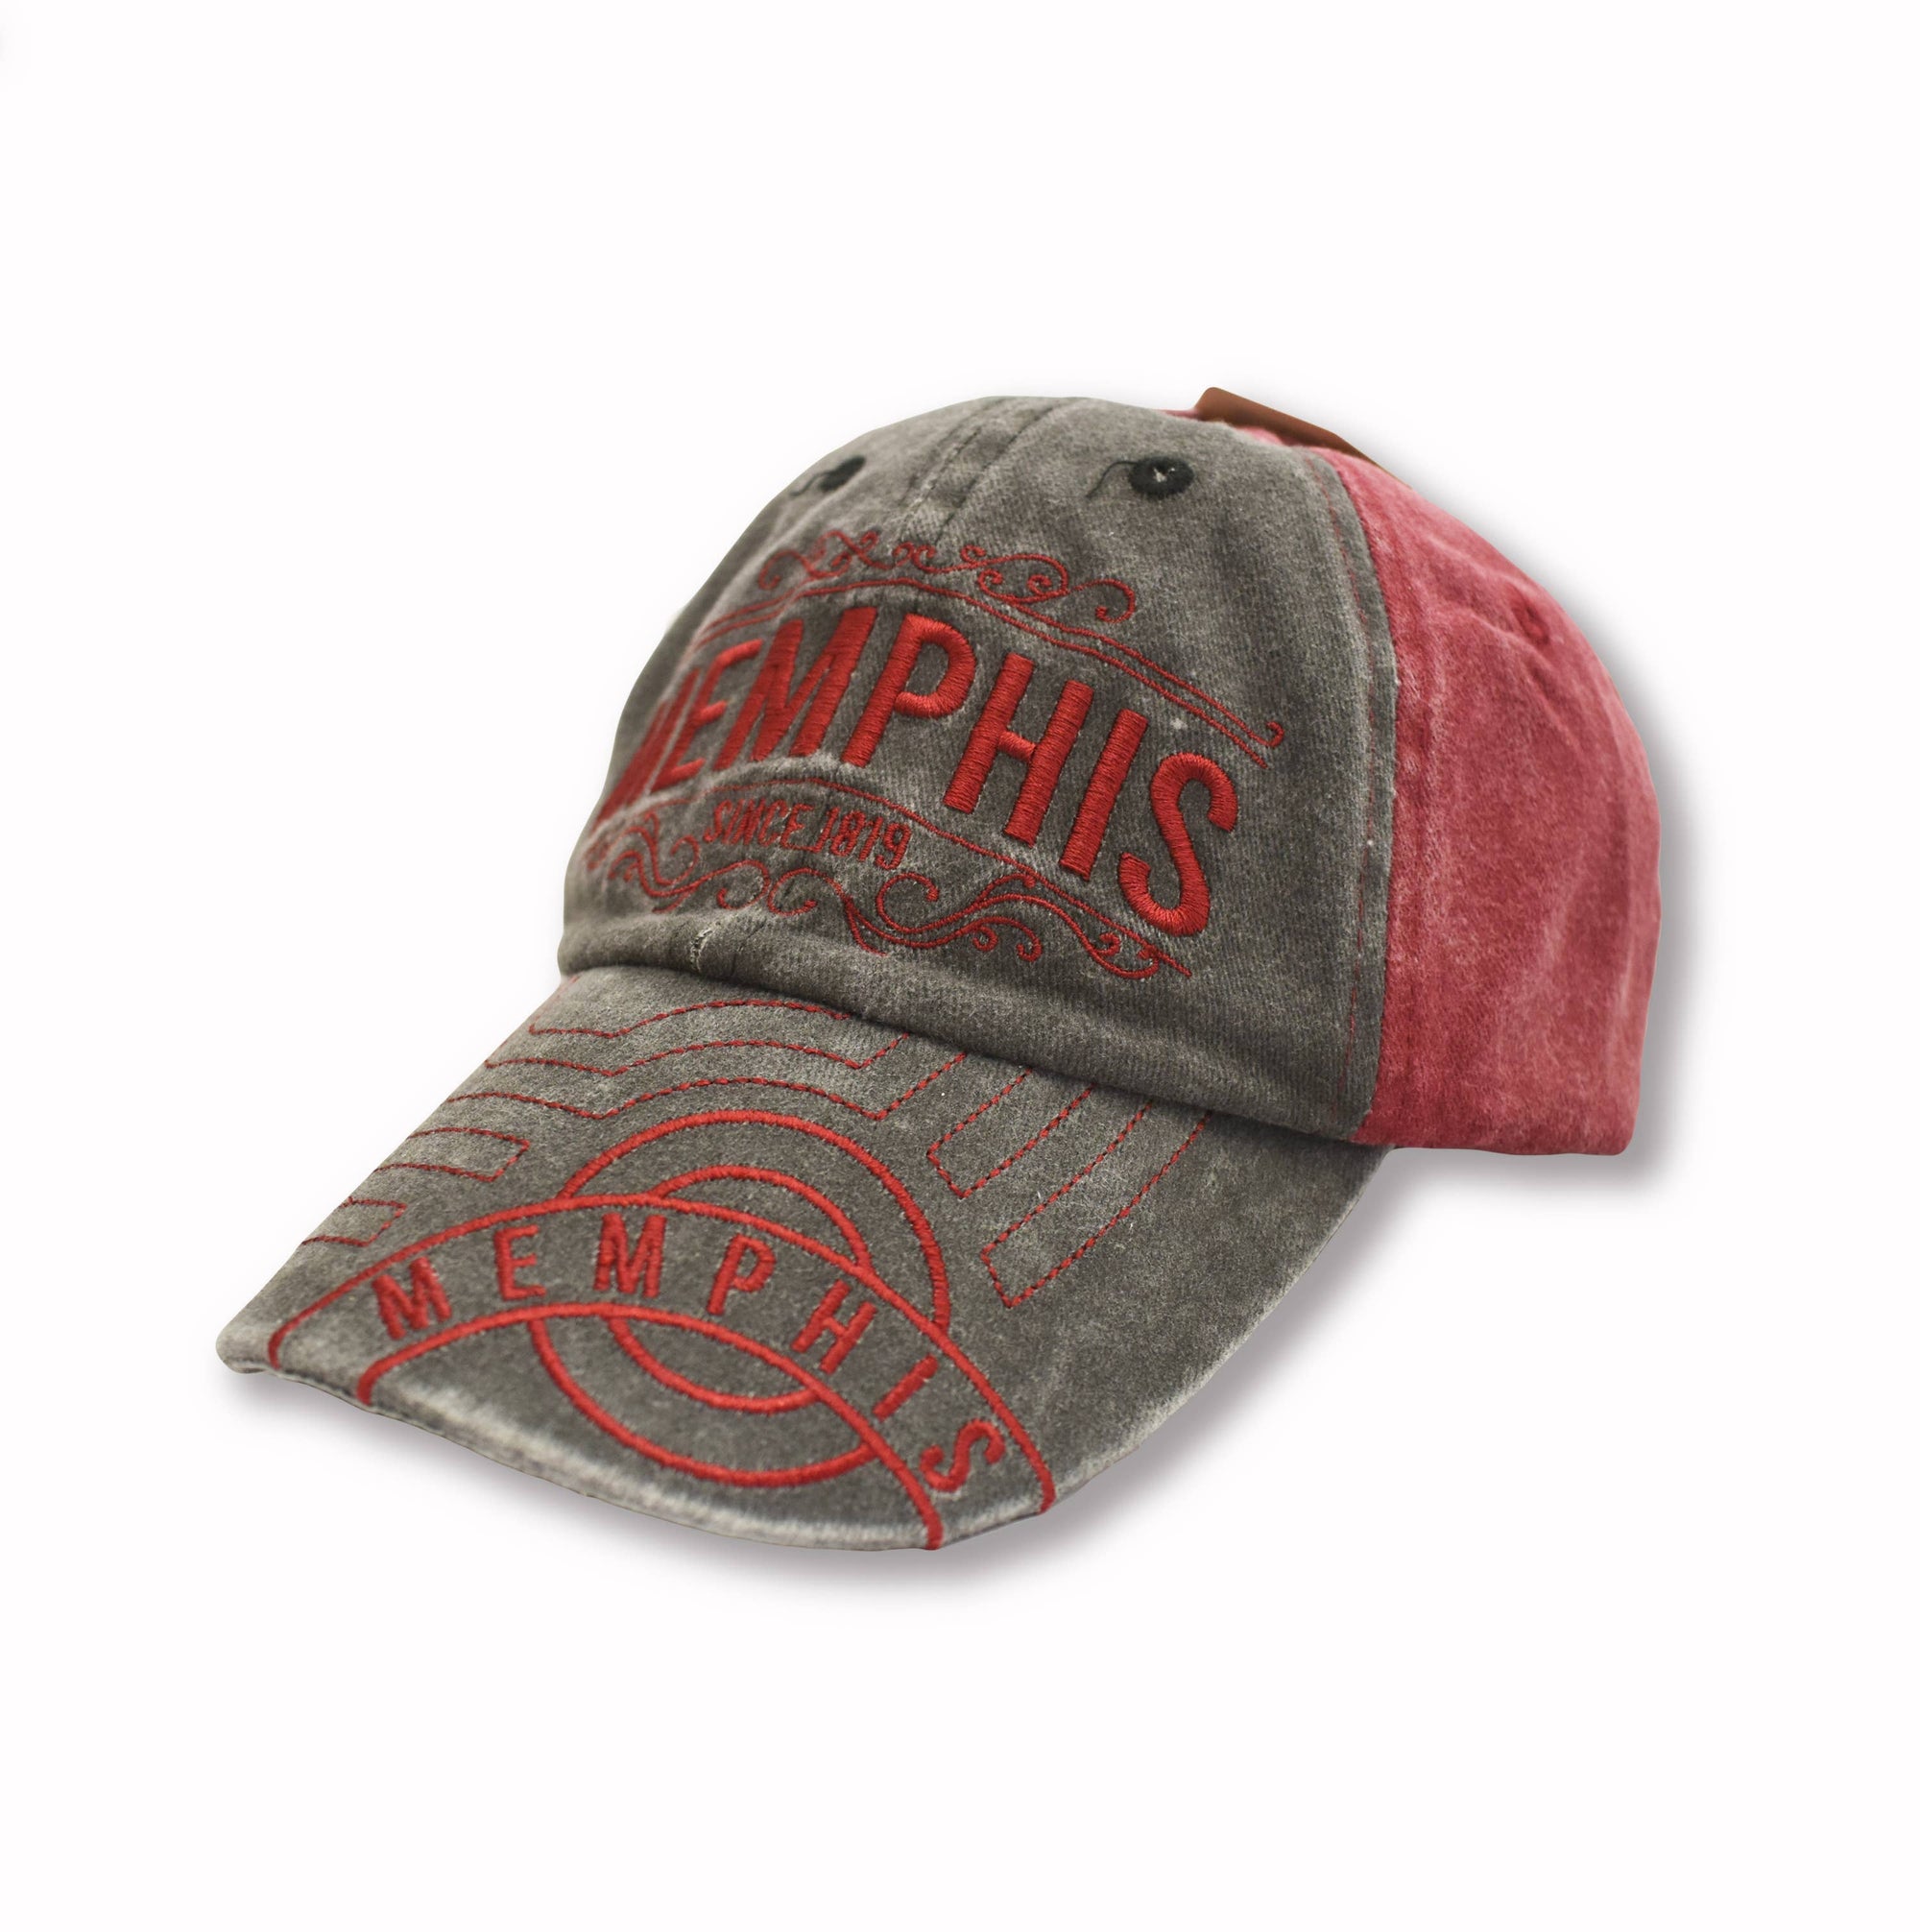 Memphis Cap - Gray And Red Since 1819